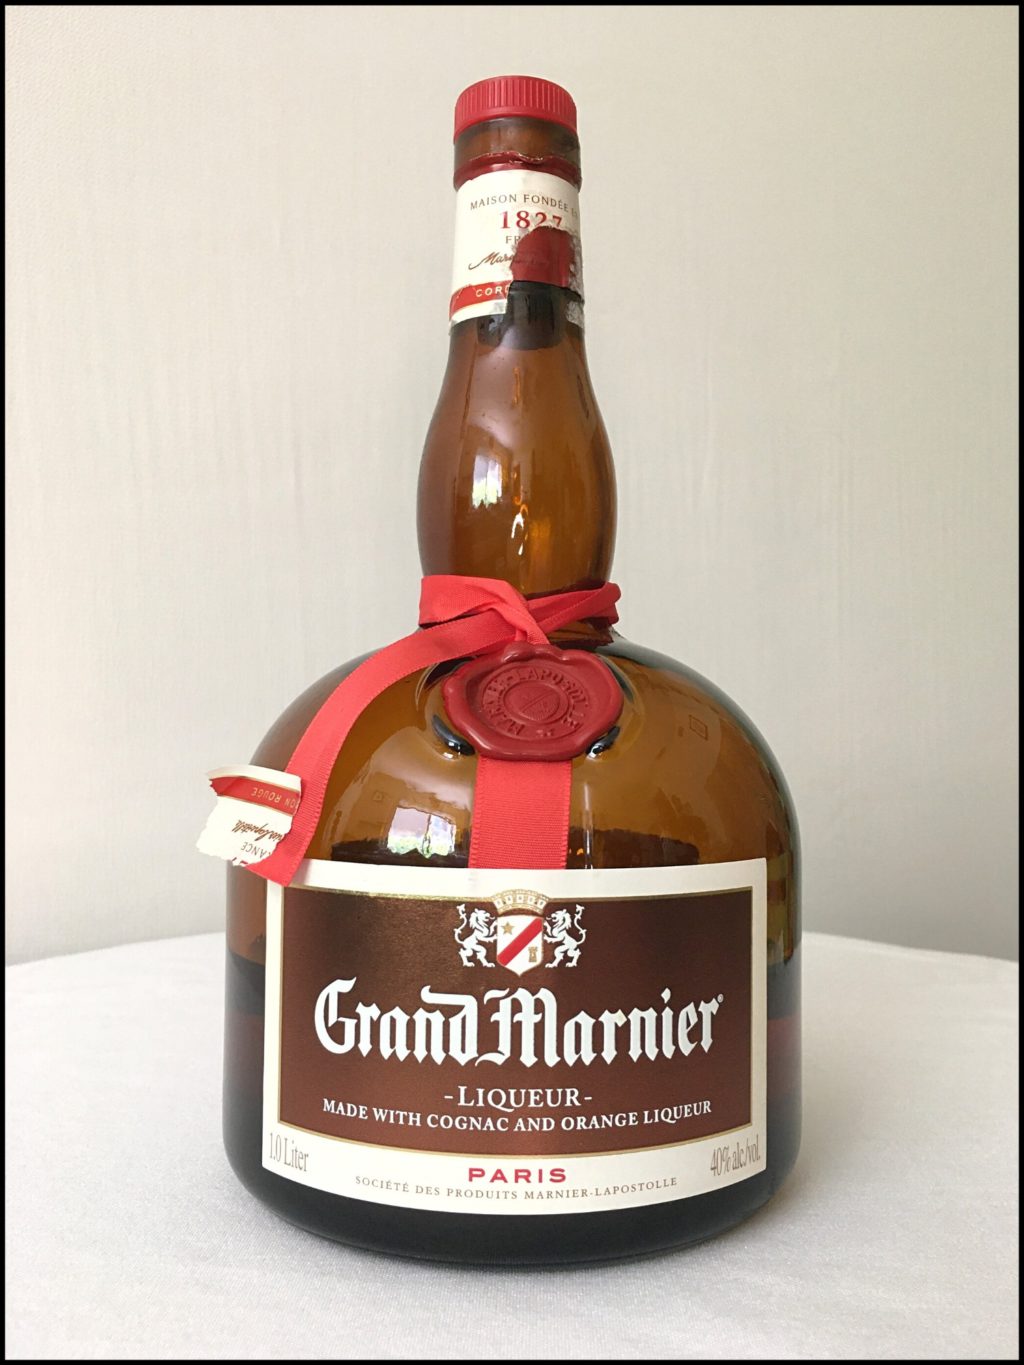 Bottle of Grand Marnier Cordon Rouge sitting on a white tablecloth, in front of a white background